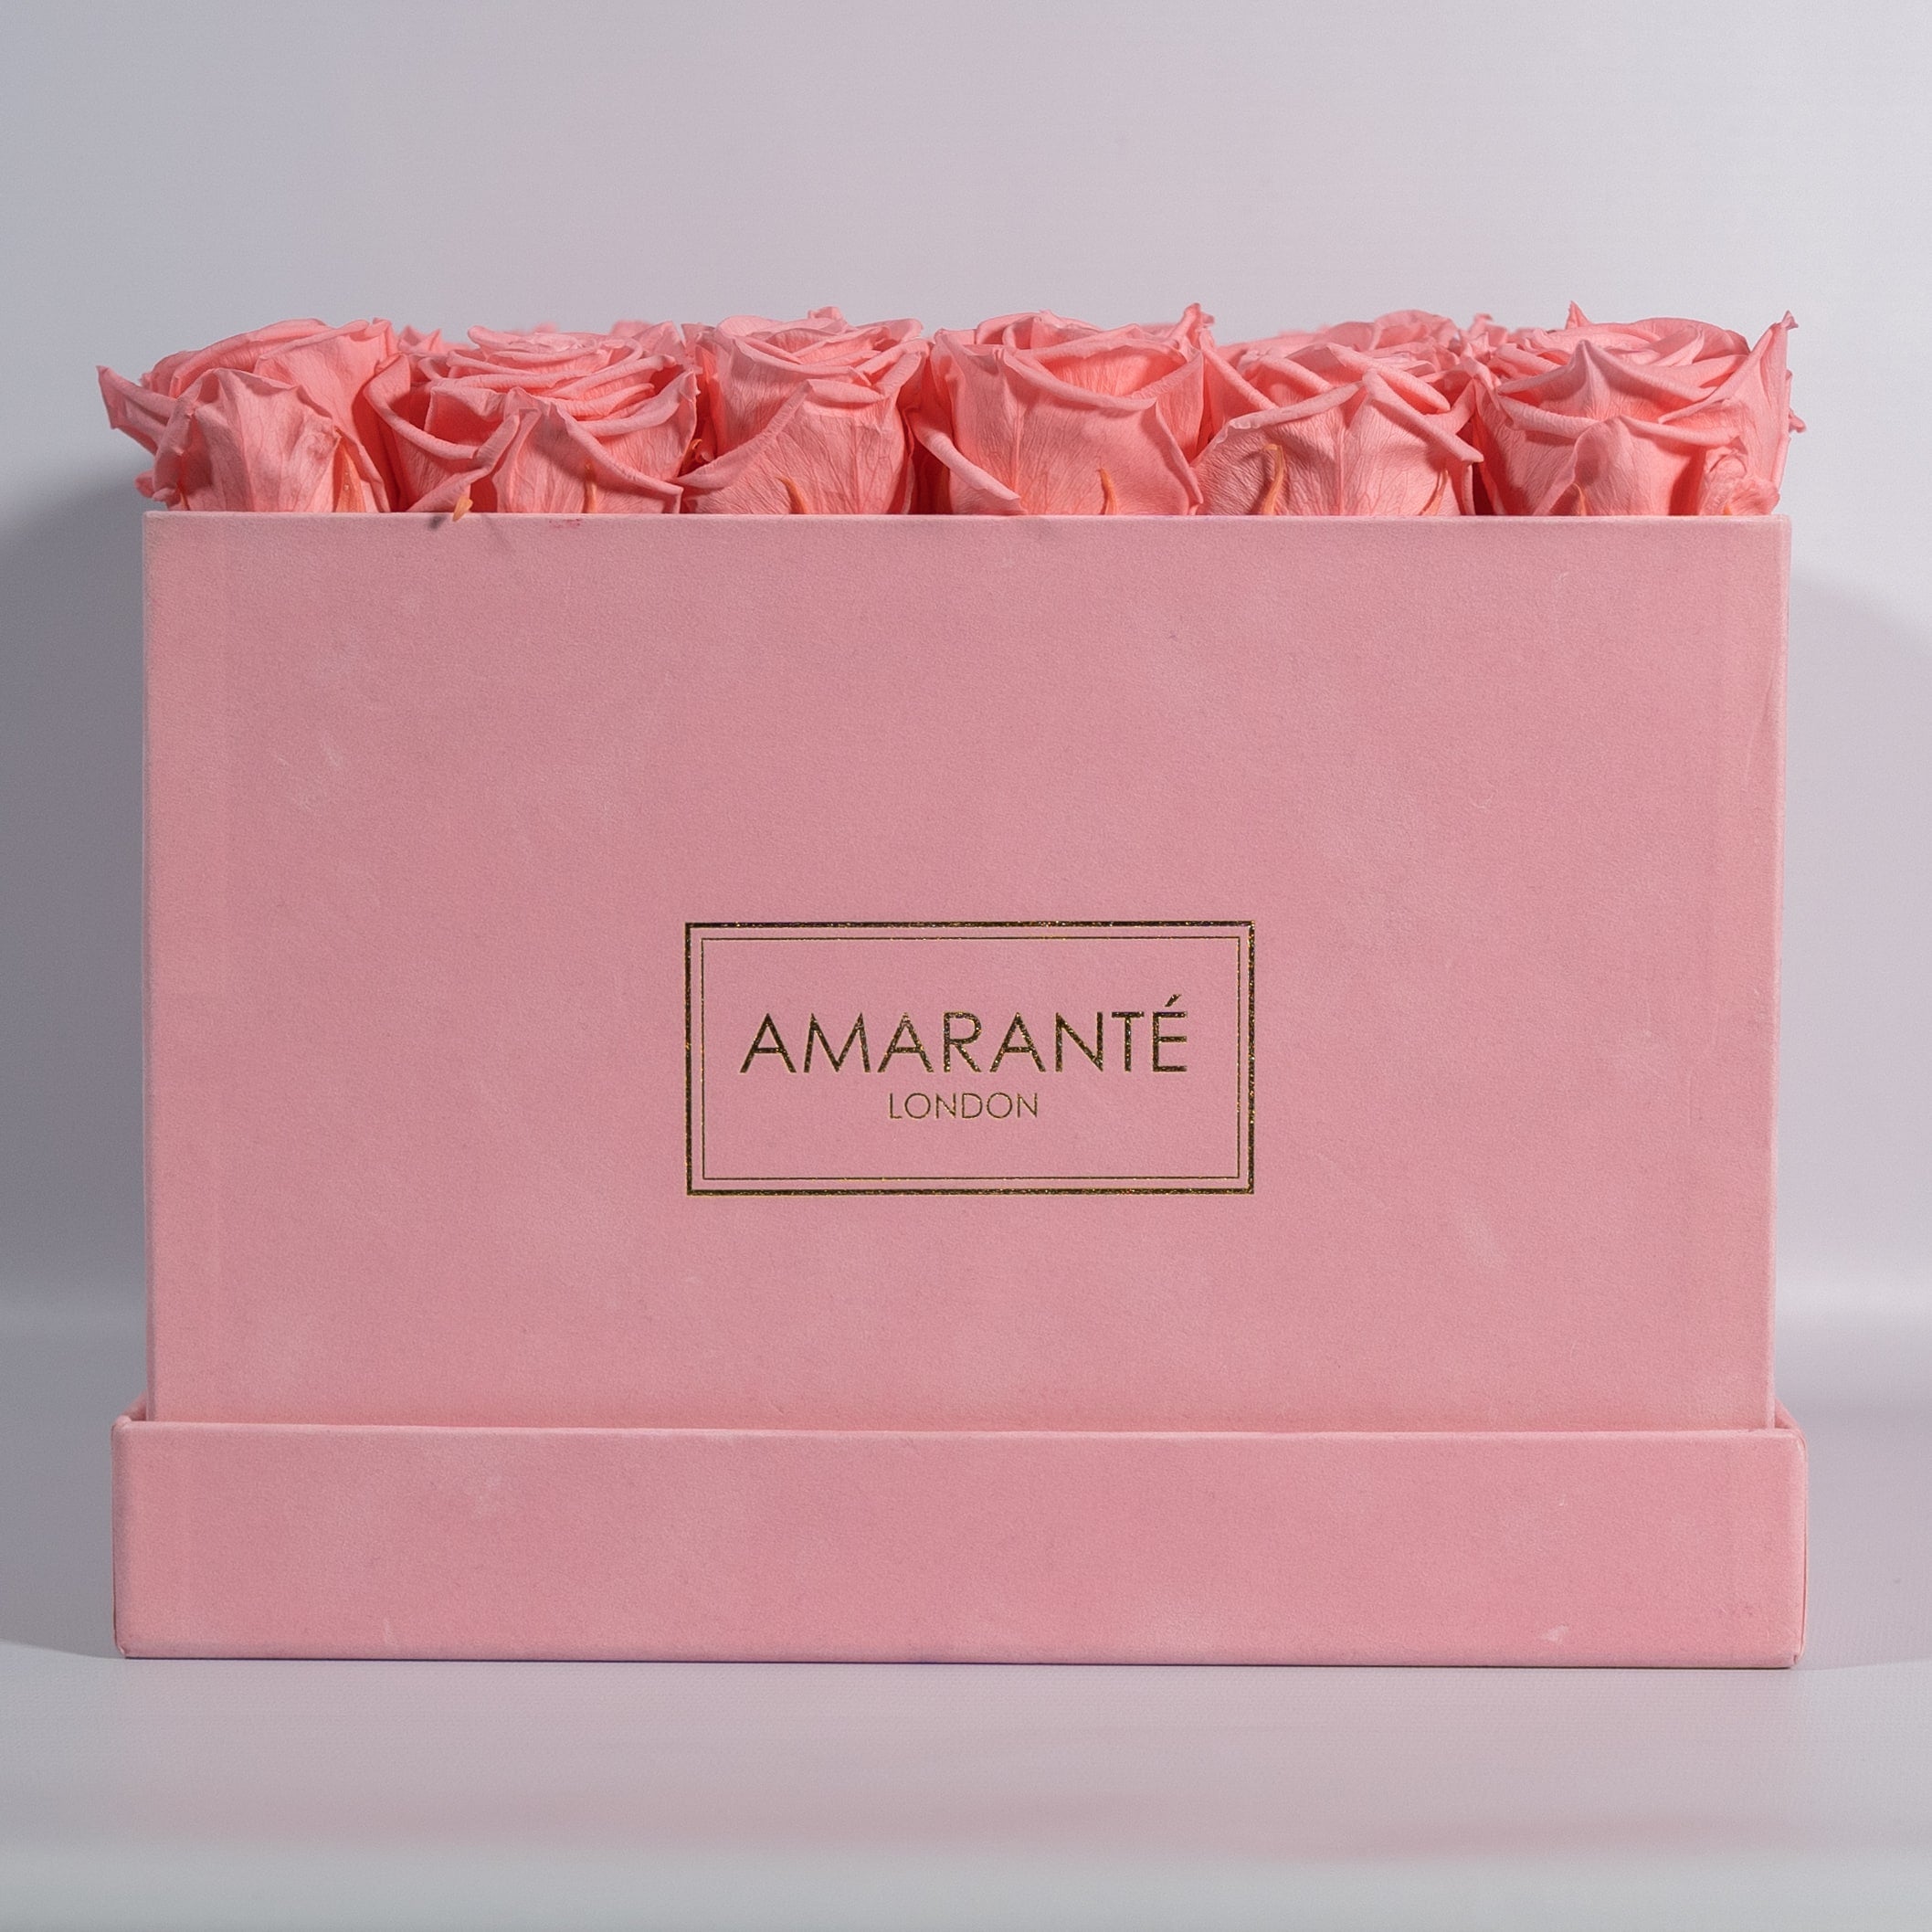 Blushing light pink roses imbedded in an alluring pink box 